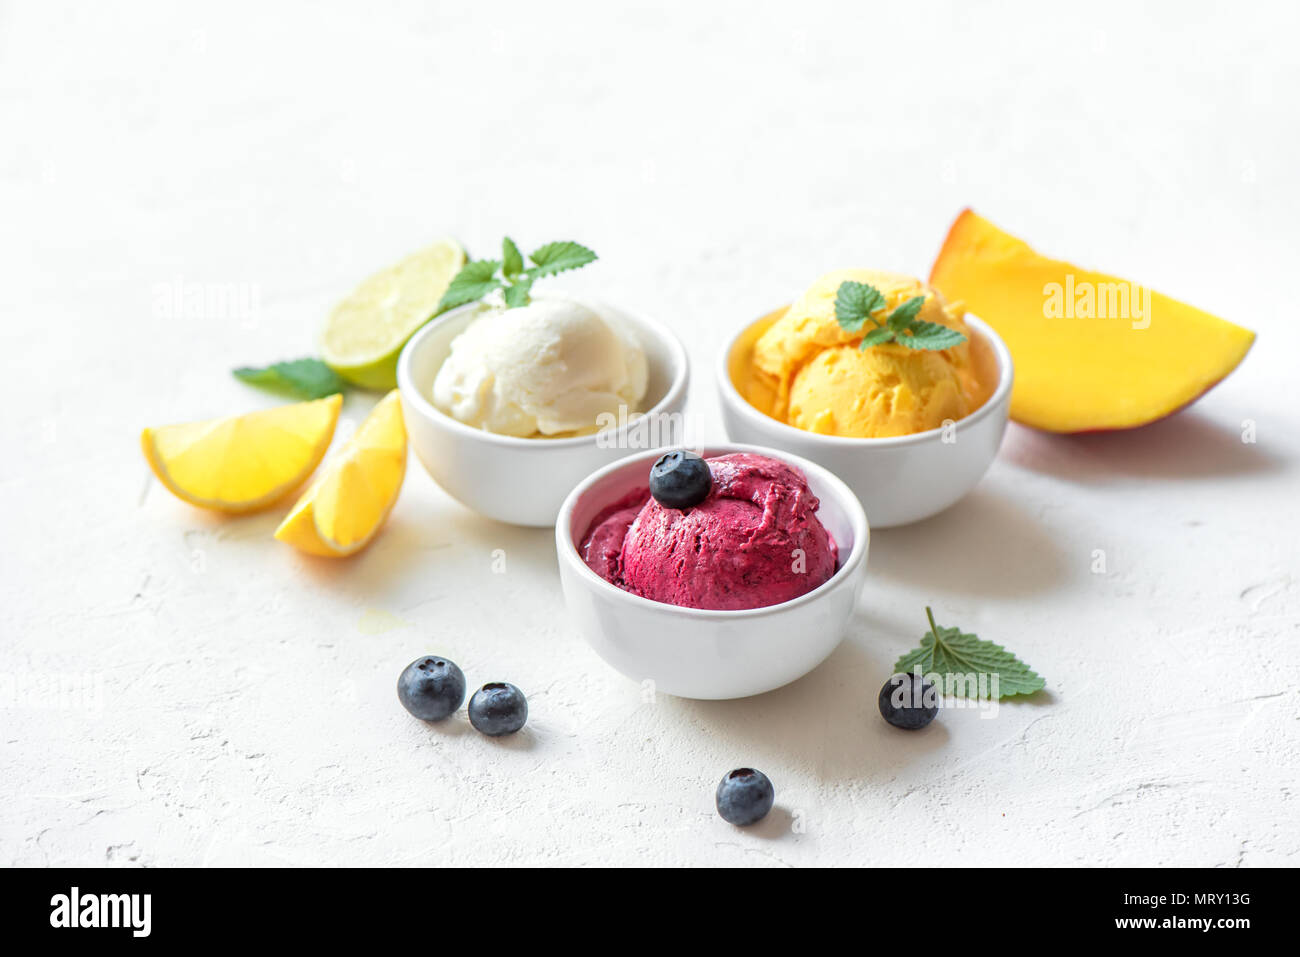 Three various fruit and berries ice creams on white background, copy space. Frozen yogurt or ice cream with lemon, mango, blueberries - healthy summer Stock Photo